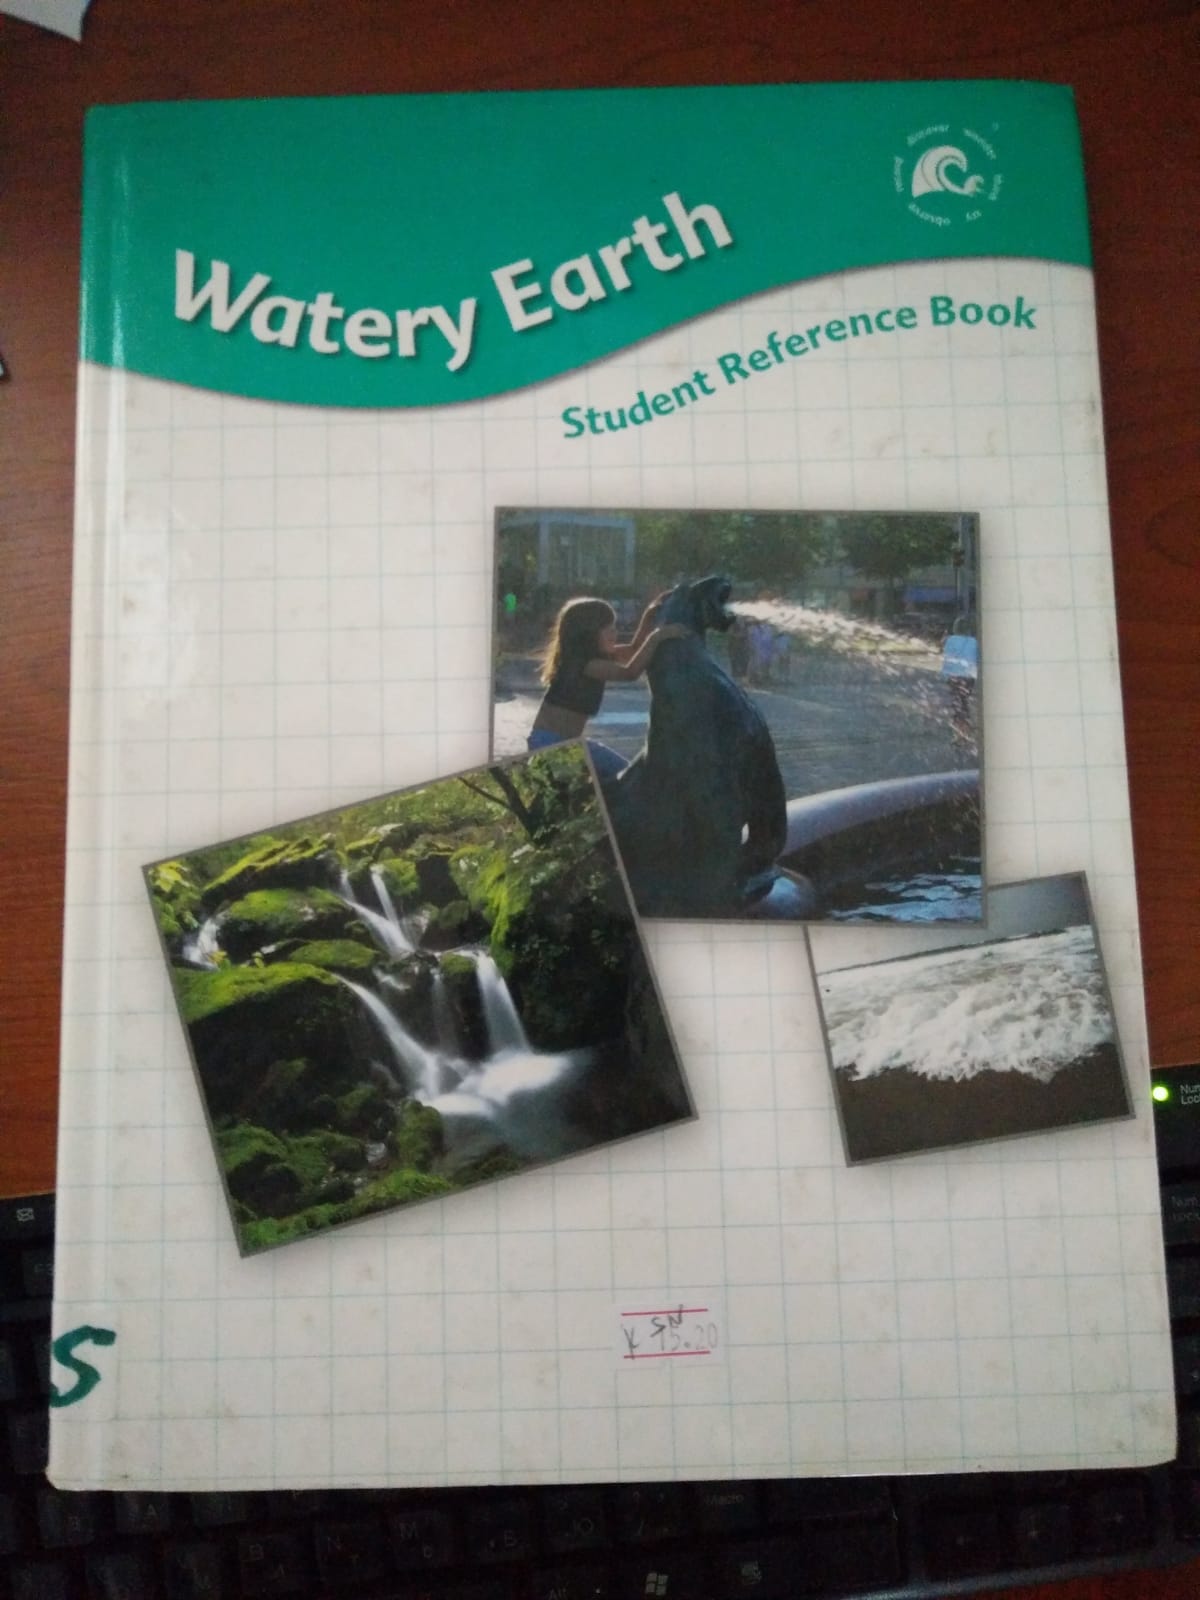 Watery Earth Student Reference Book